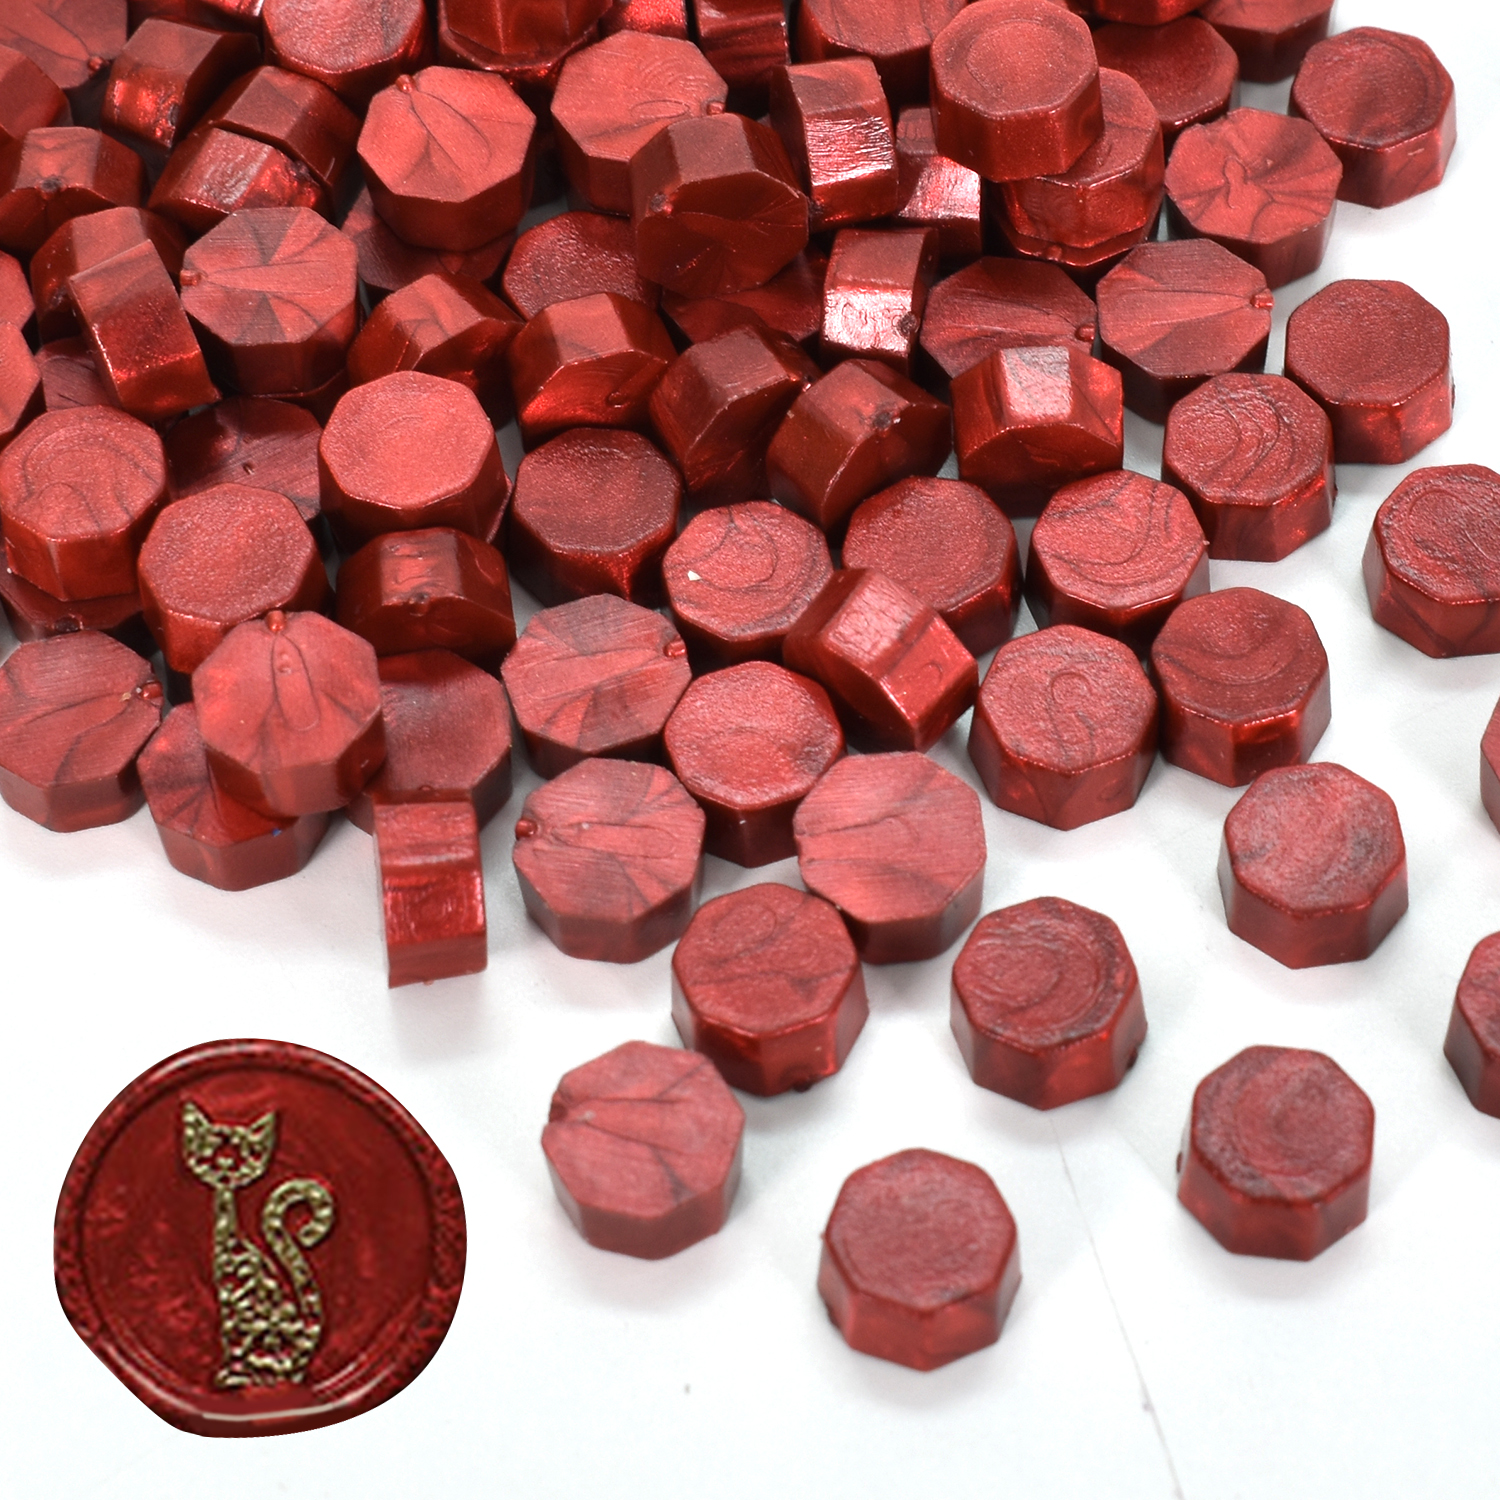 Moorlando 600pcs Sealing Wax Beads for Wax Seal Stamp, Perfect for Gift  Sealing, Letter Sealing, Crafting Projects, Invitations Cards Sealing